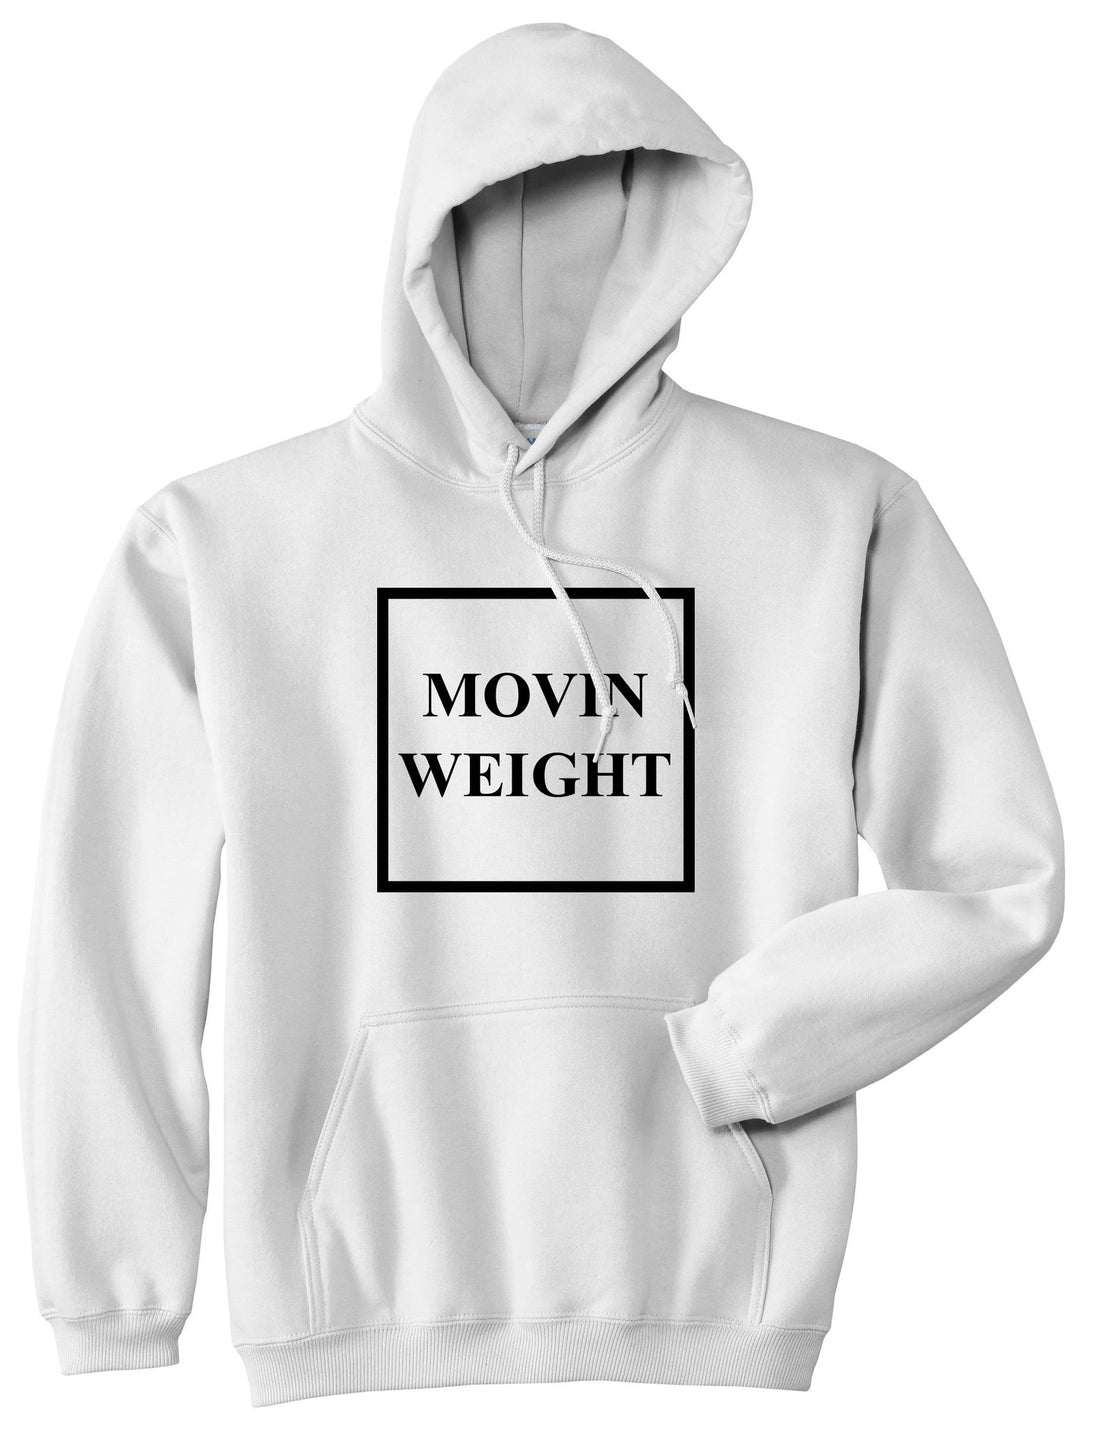 Movin Weight Hustler Pullover Hoodie Hoody in White by Kings Of NY